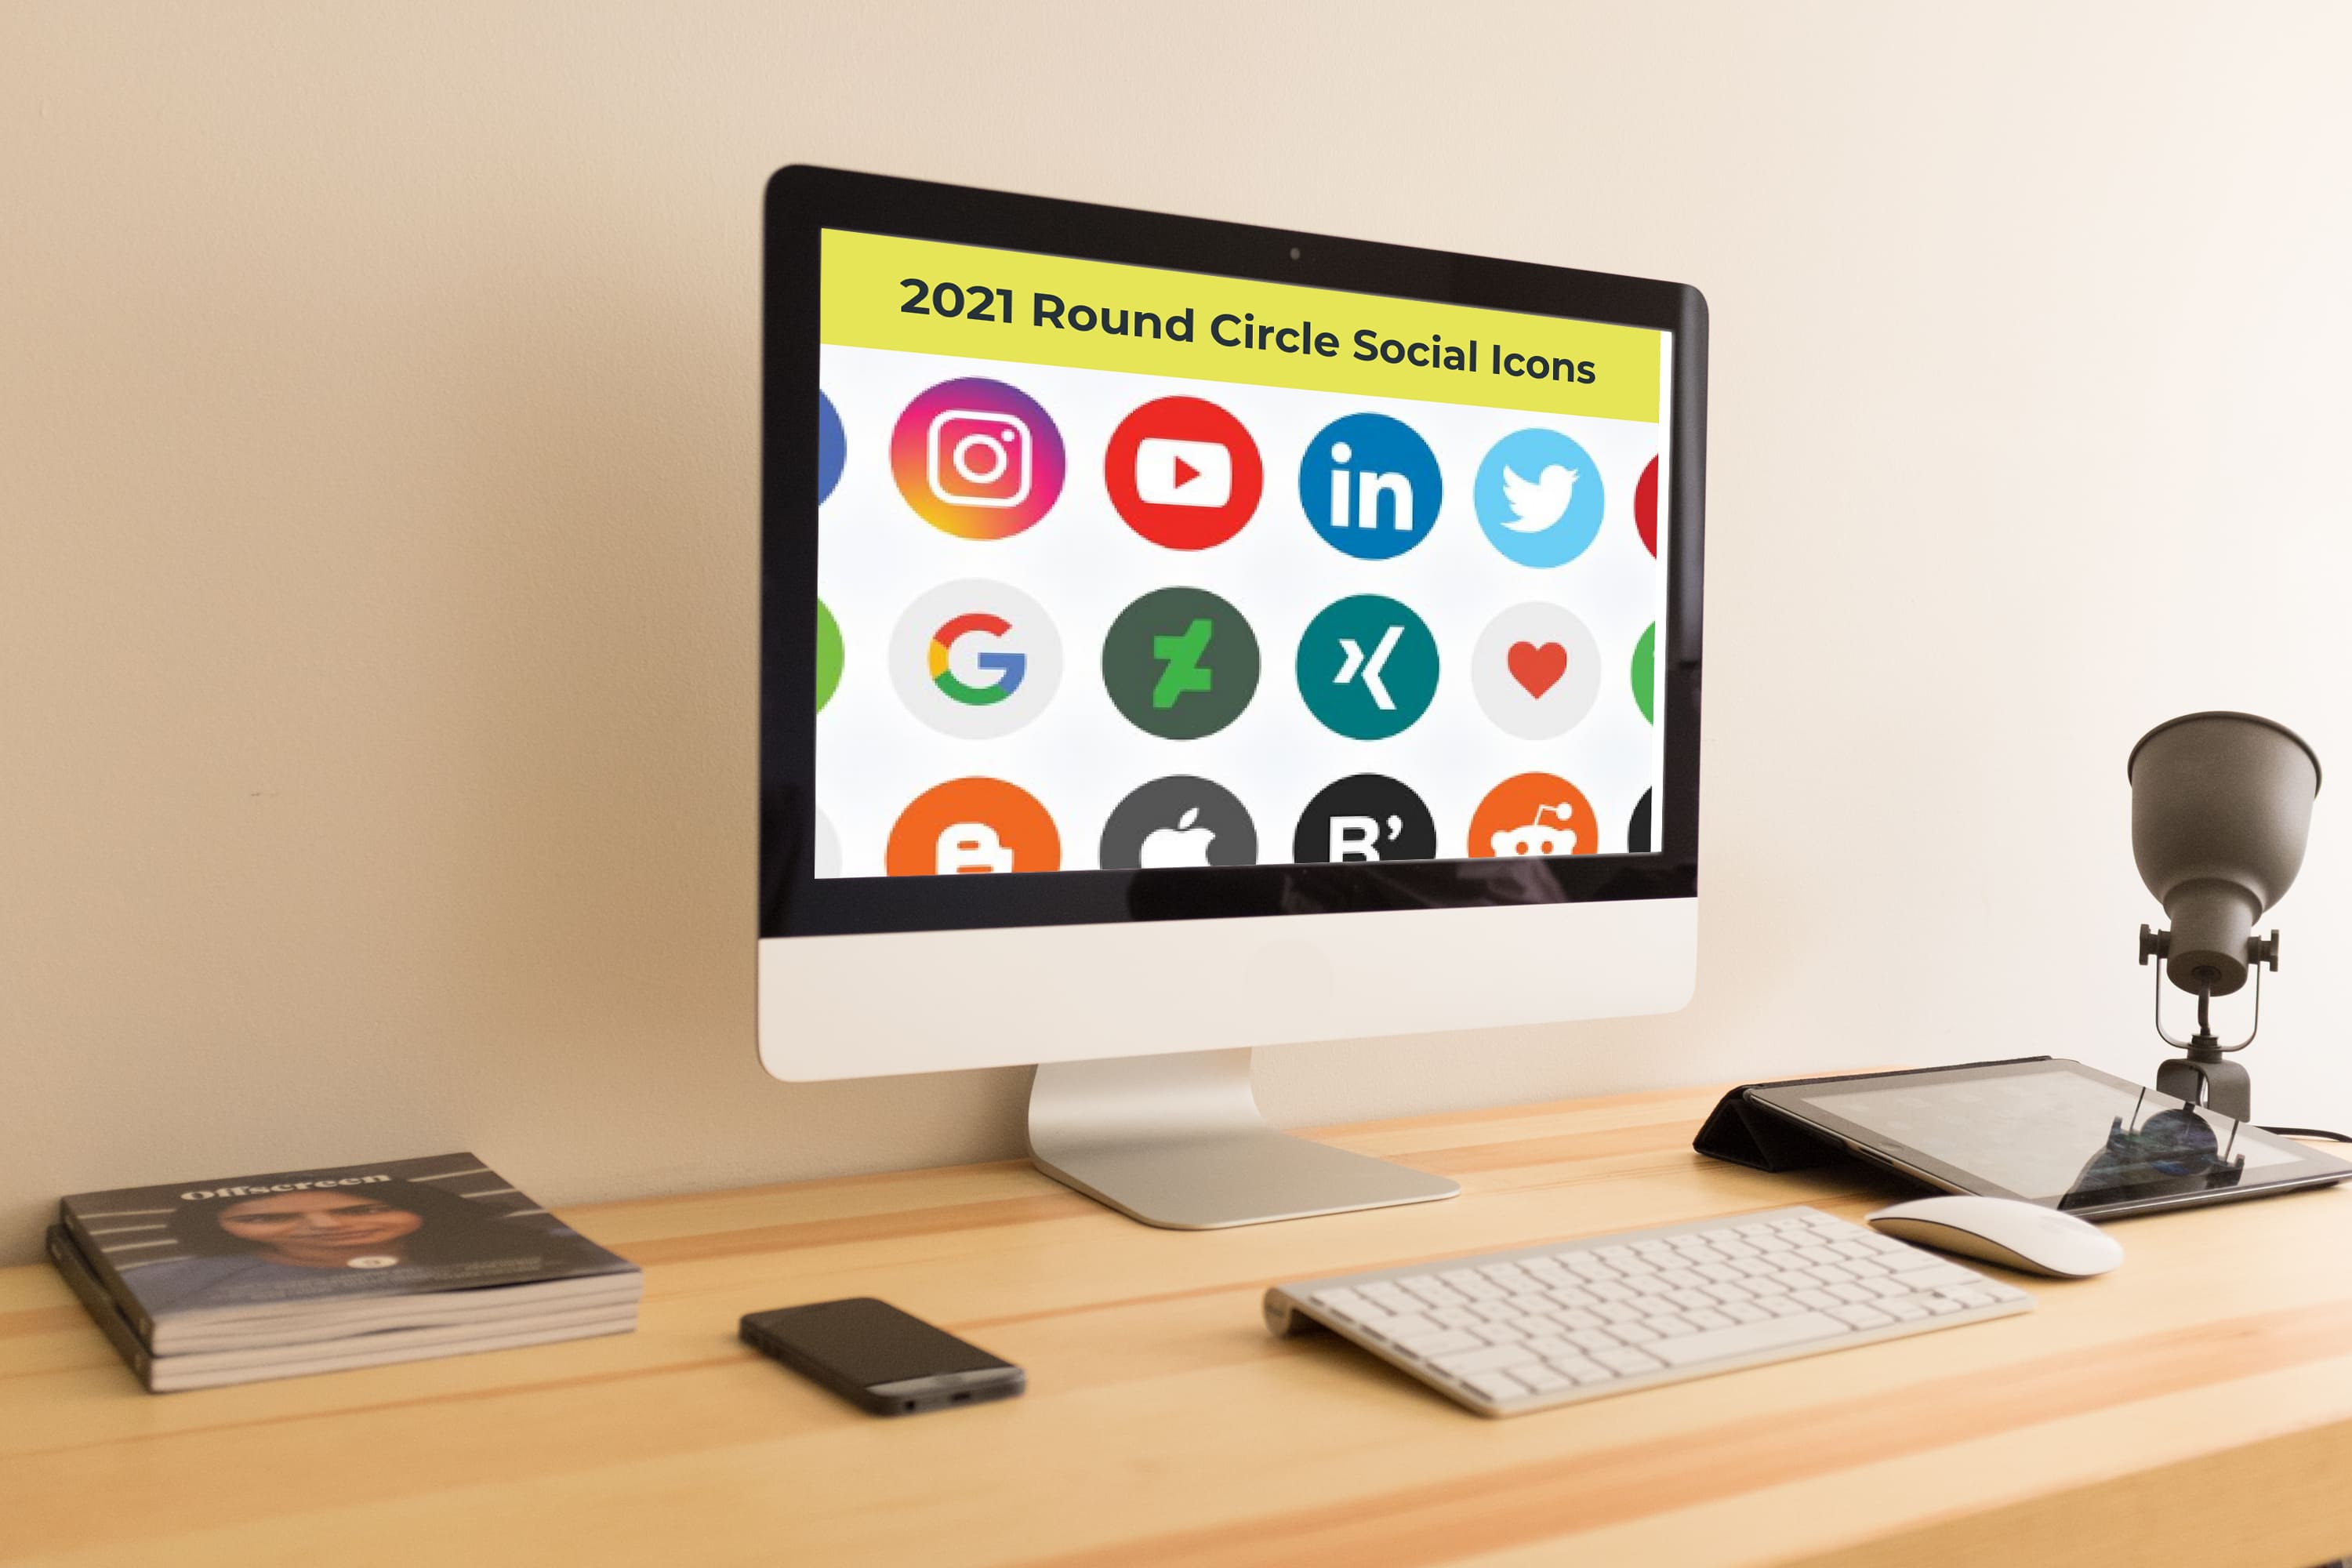 Desktop option of the 2021 Round Circle Social Icons.